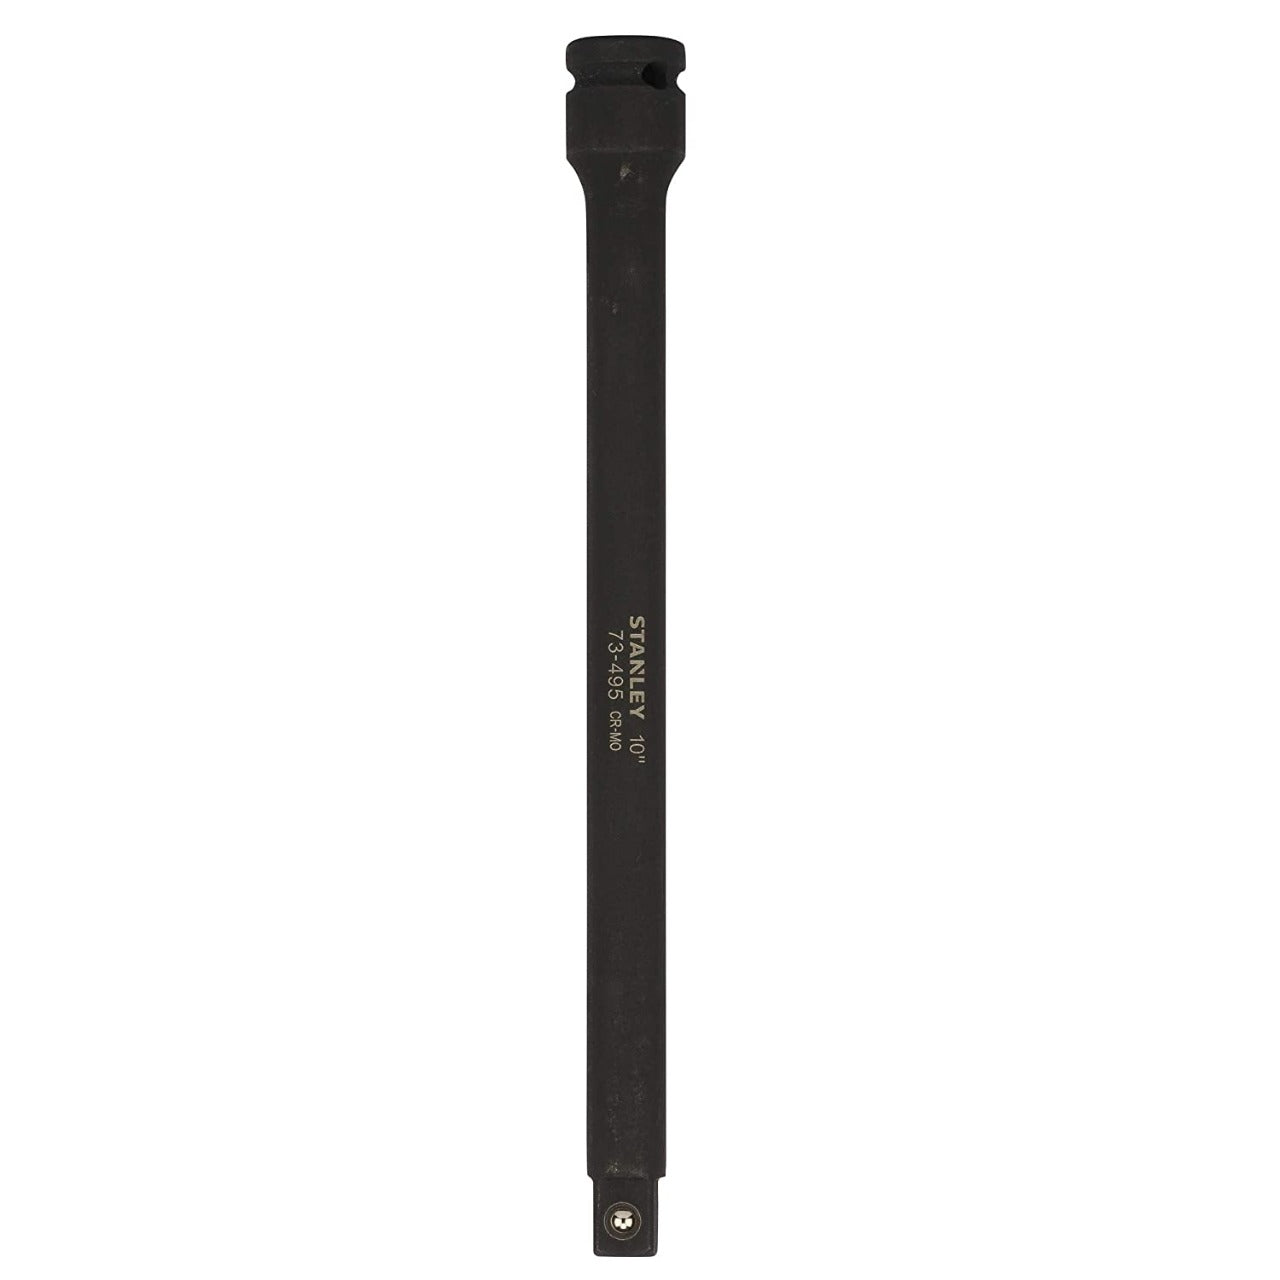 Stanley 1/2 inch Impact Extension